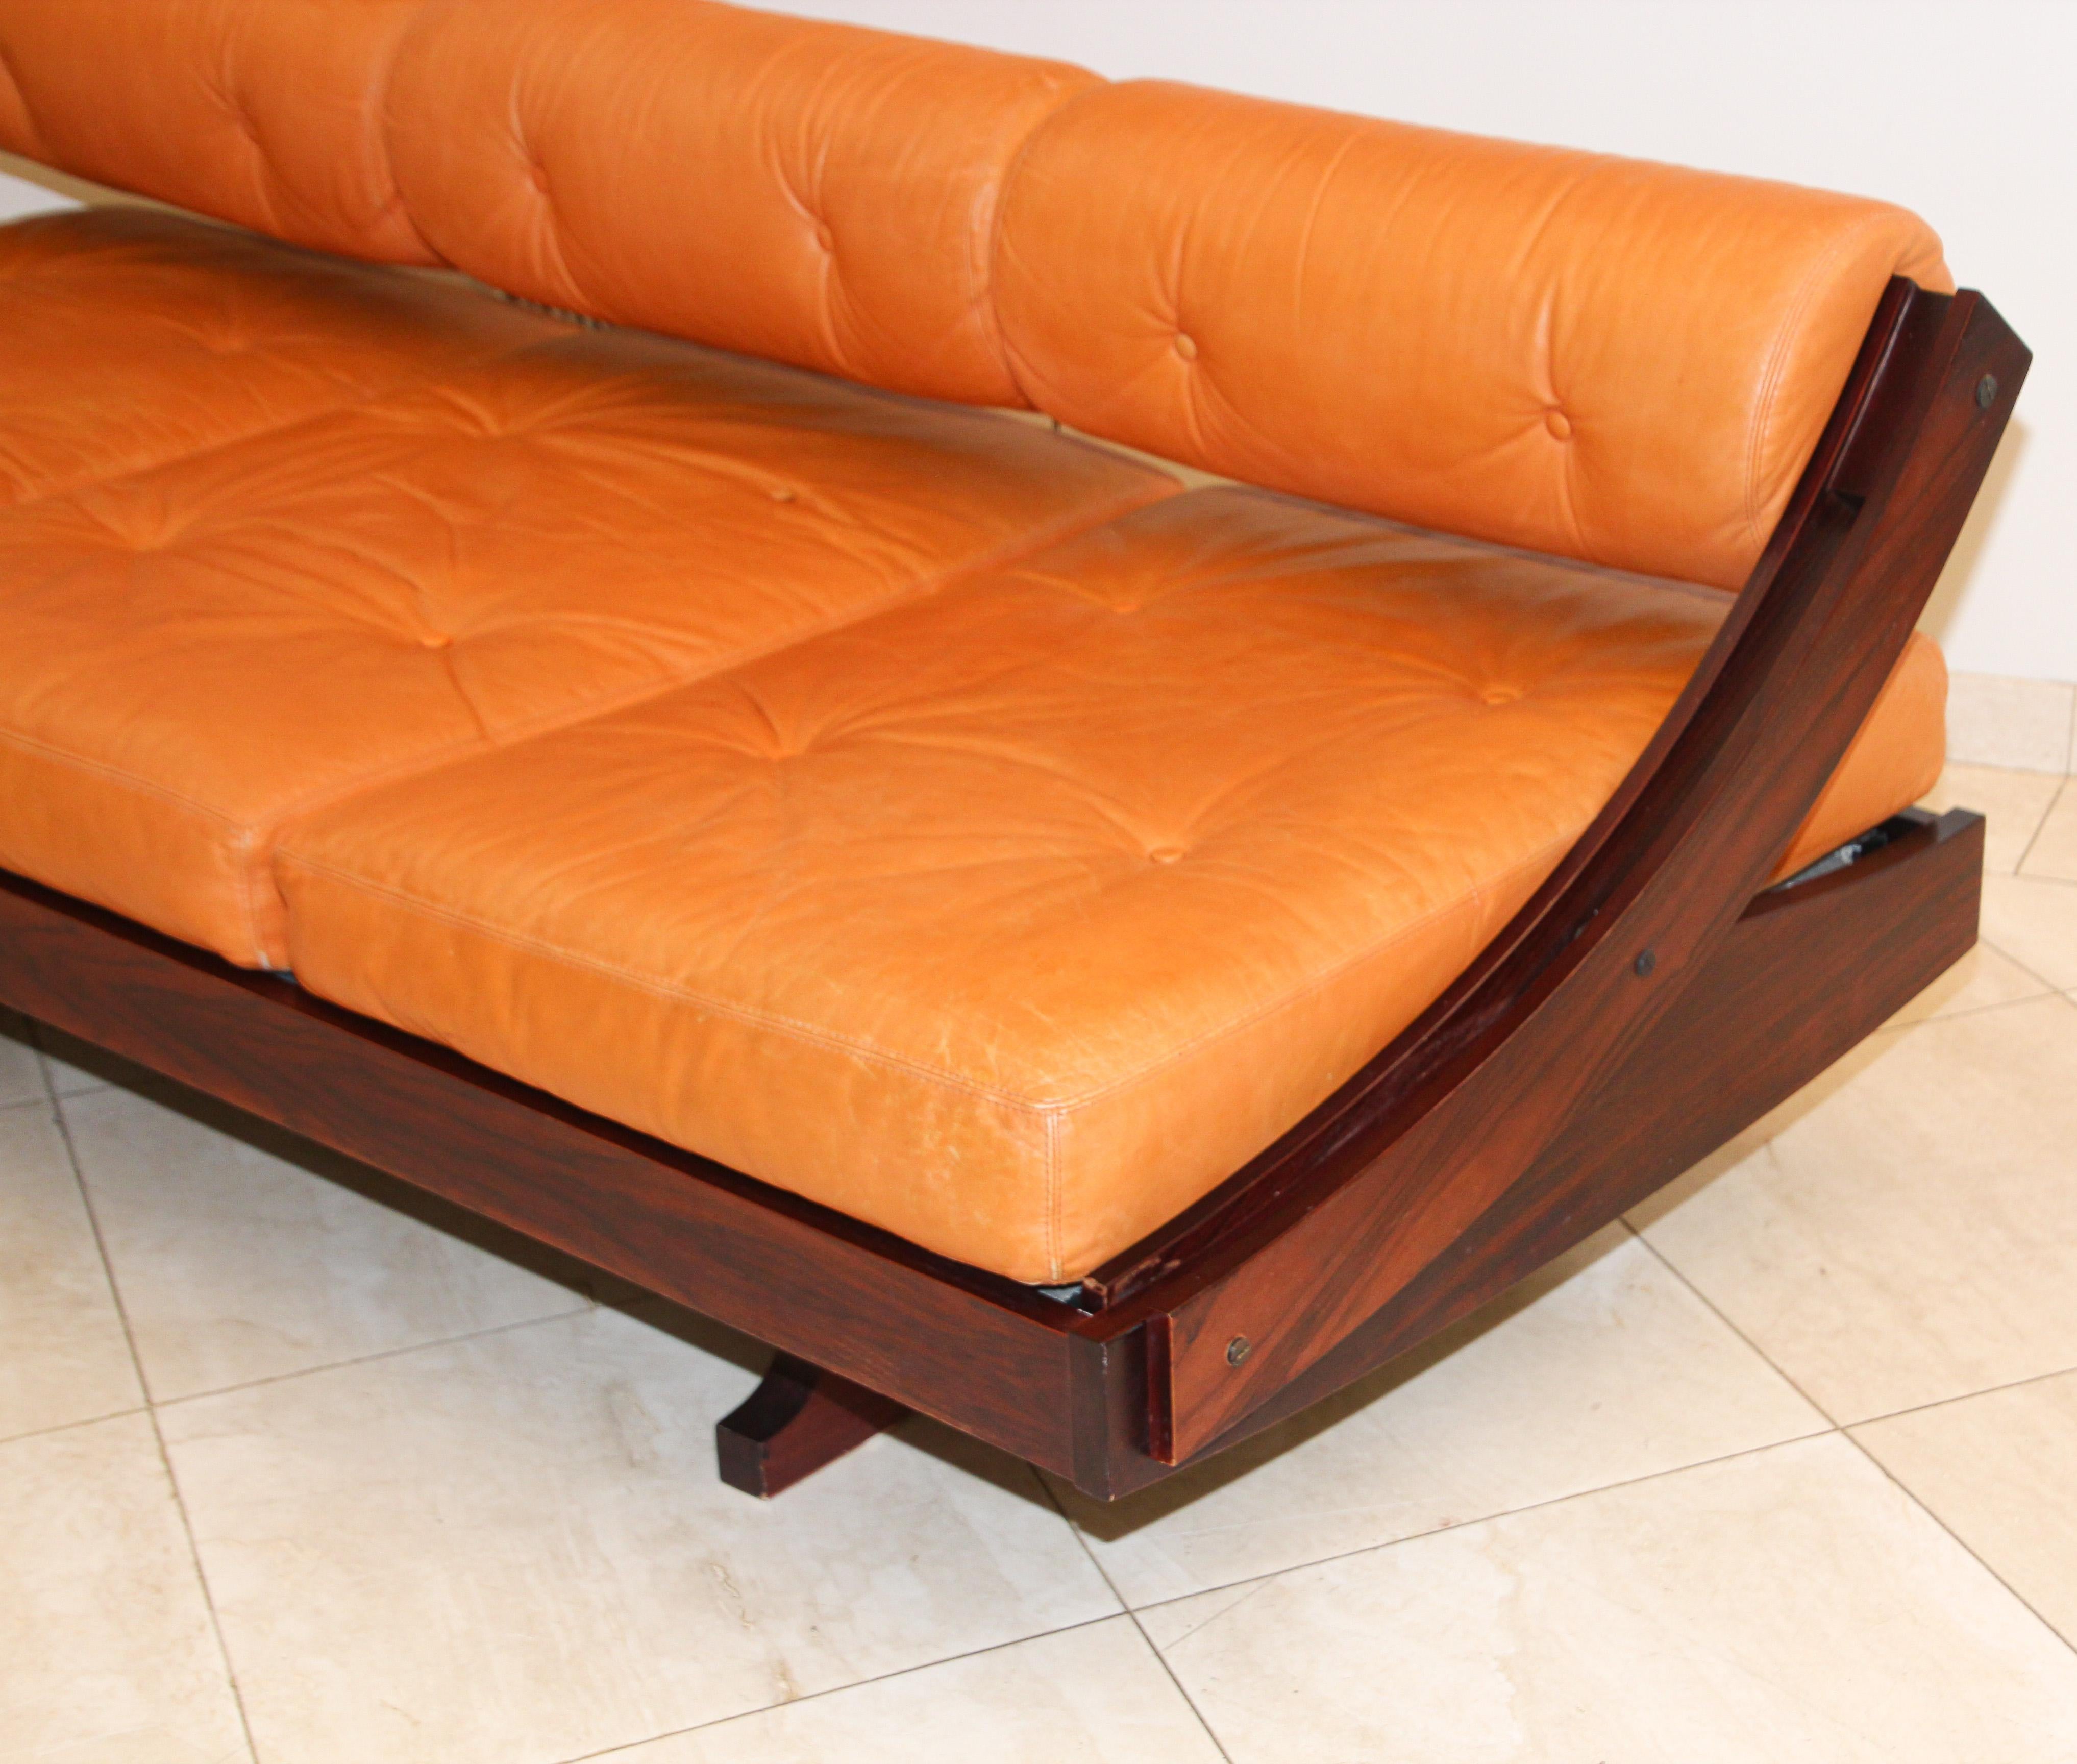 Gianni Songia Leather Daybed and Sofa for Sormani, Italy, 1963 For Sale 2